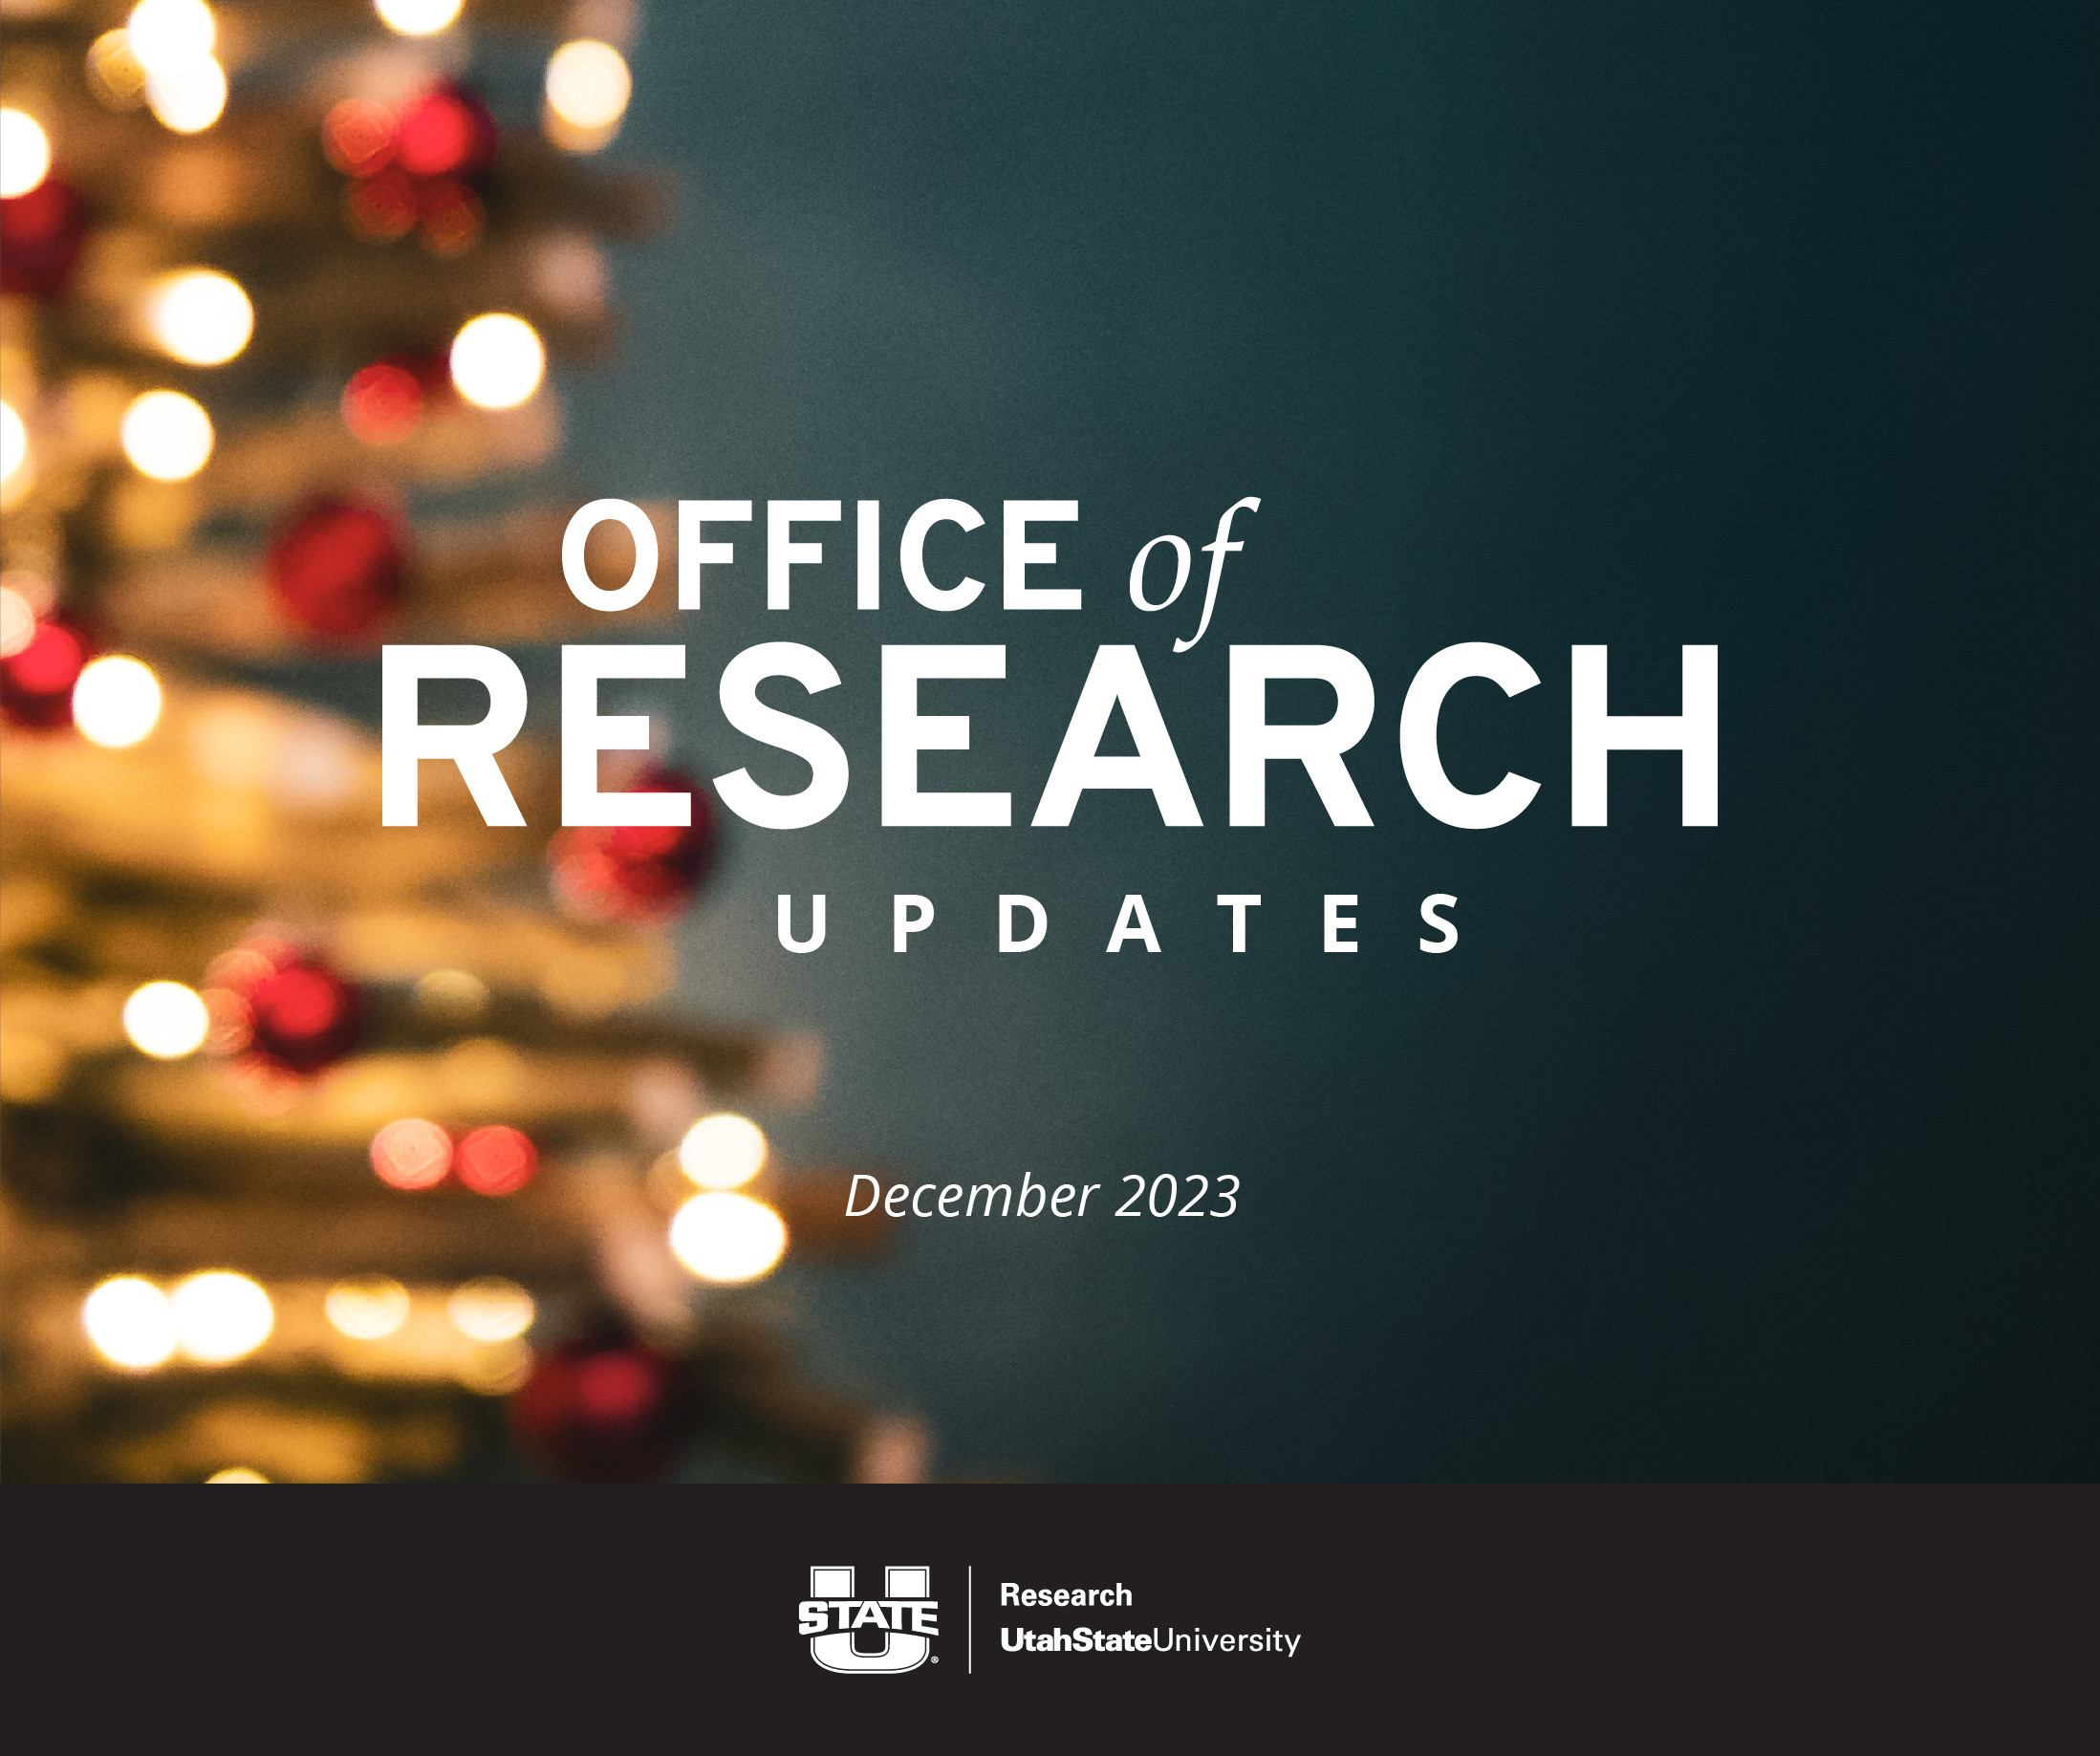 Office of Research Updates December 2023